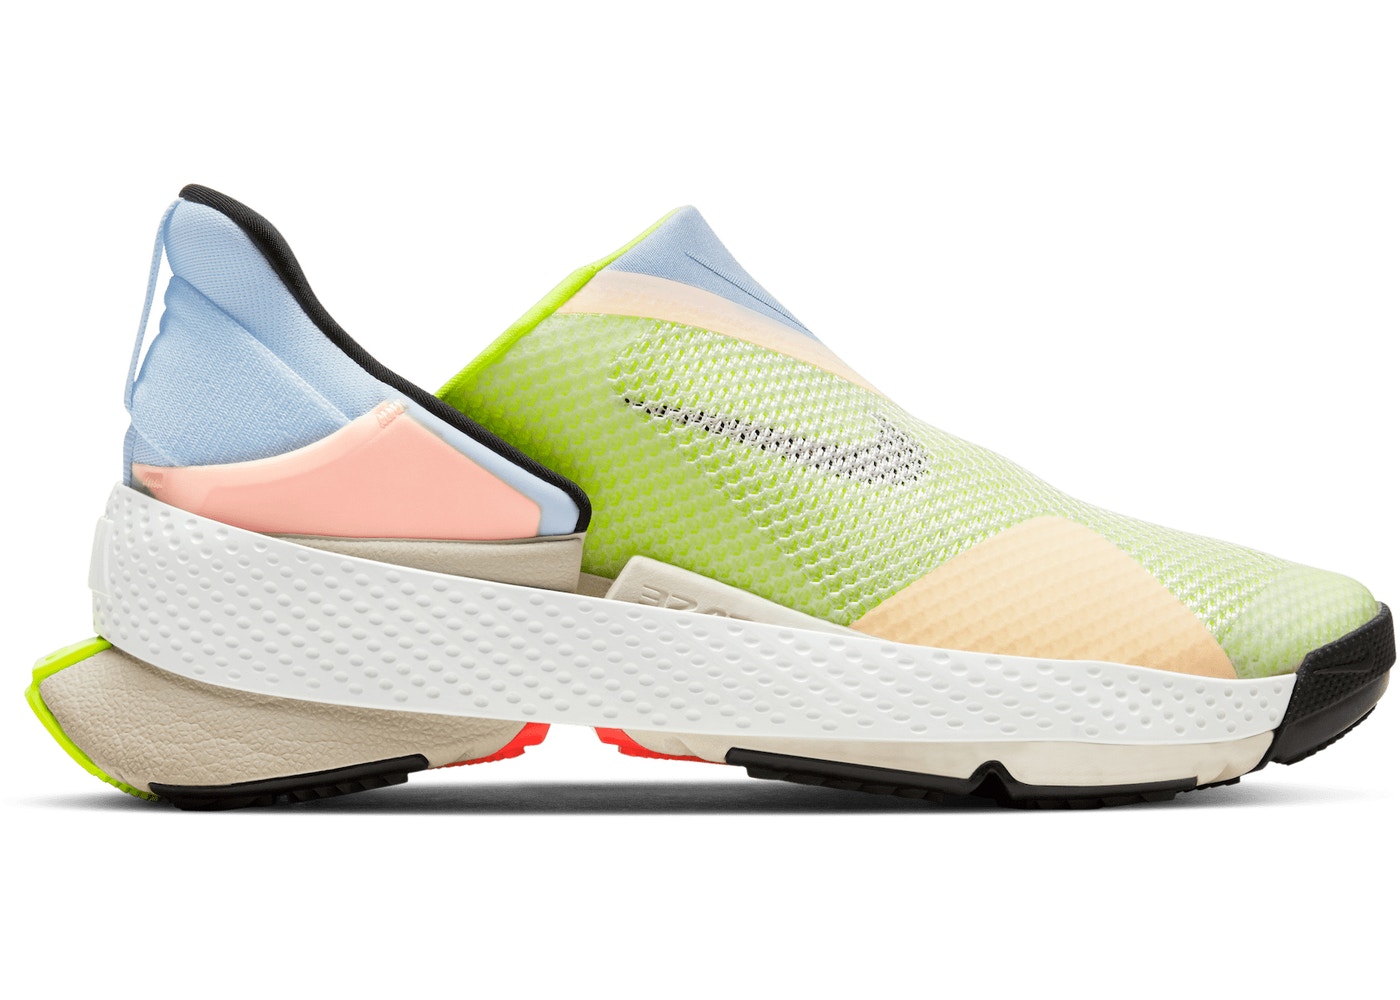 CasoC Blog: Nike's hands-free new shoes